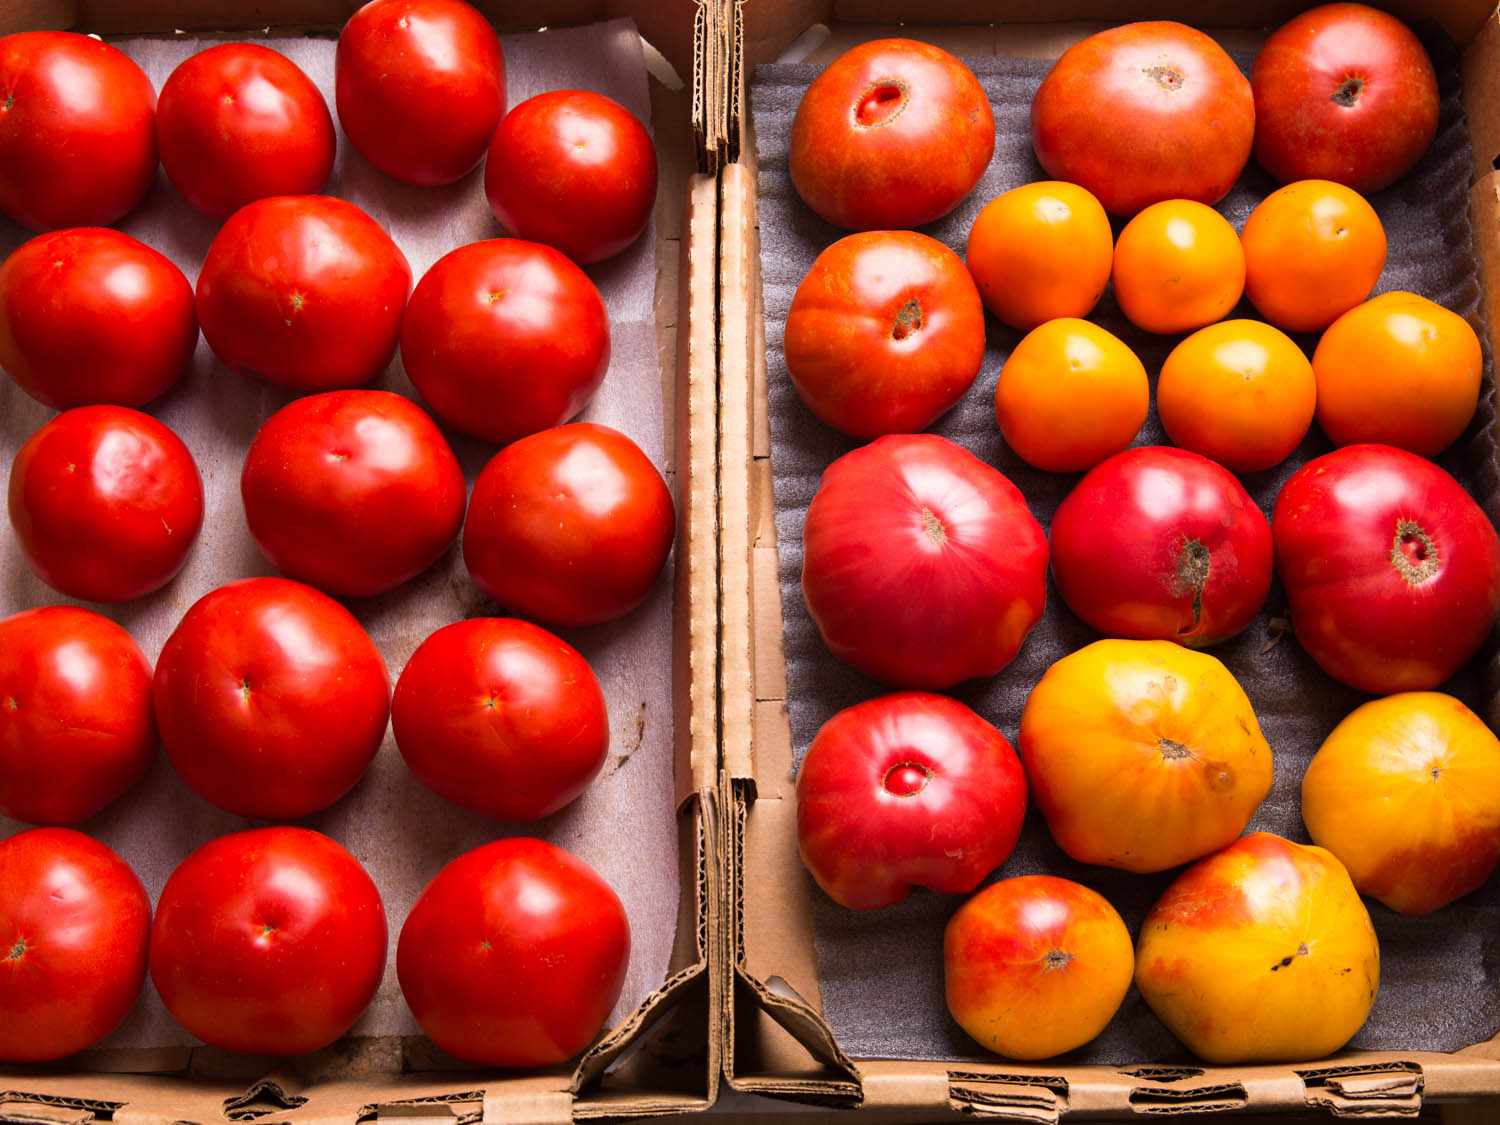 An overhead of two boxes full of tomatoes. The left box contains all the same type of red tomato and the right box contains tomatoes of various colors and sizes.